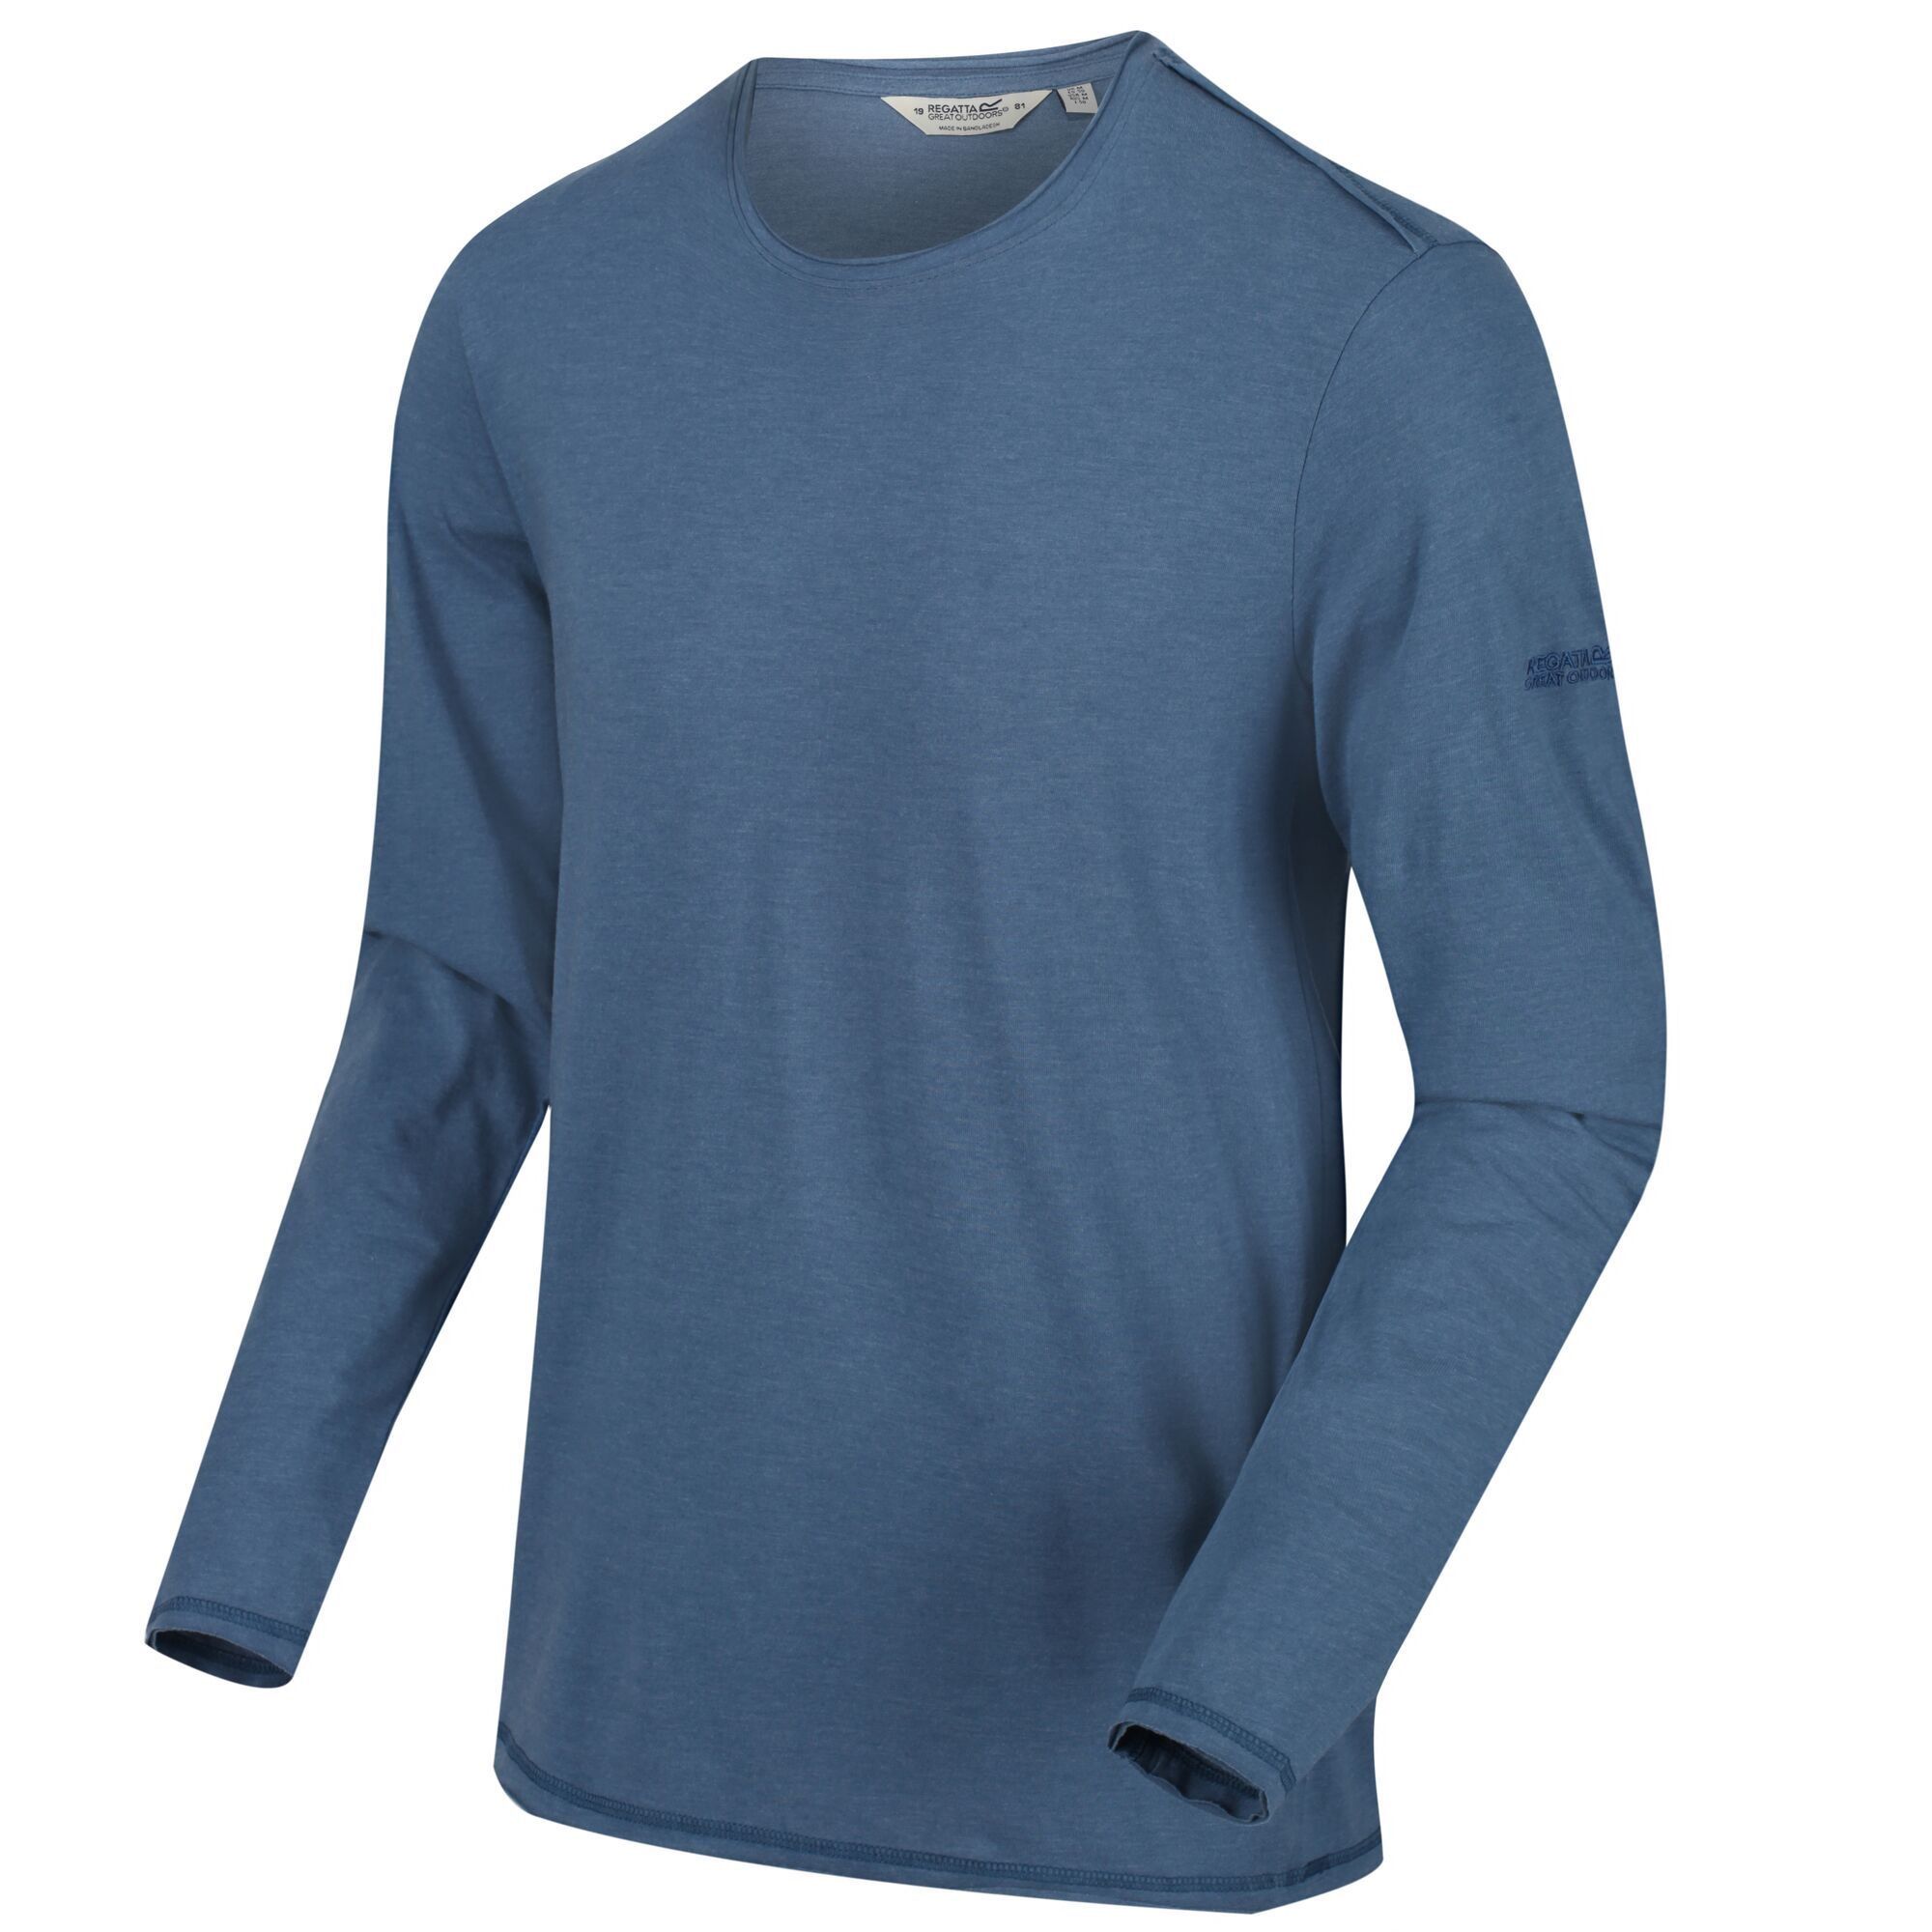 60% Cotton, 40% Polyester. Sustainably sourced, long-sleeved crew neck top made from lightweight organic cotton-blend material. Naturally breathable and light-to-wear.